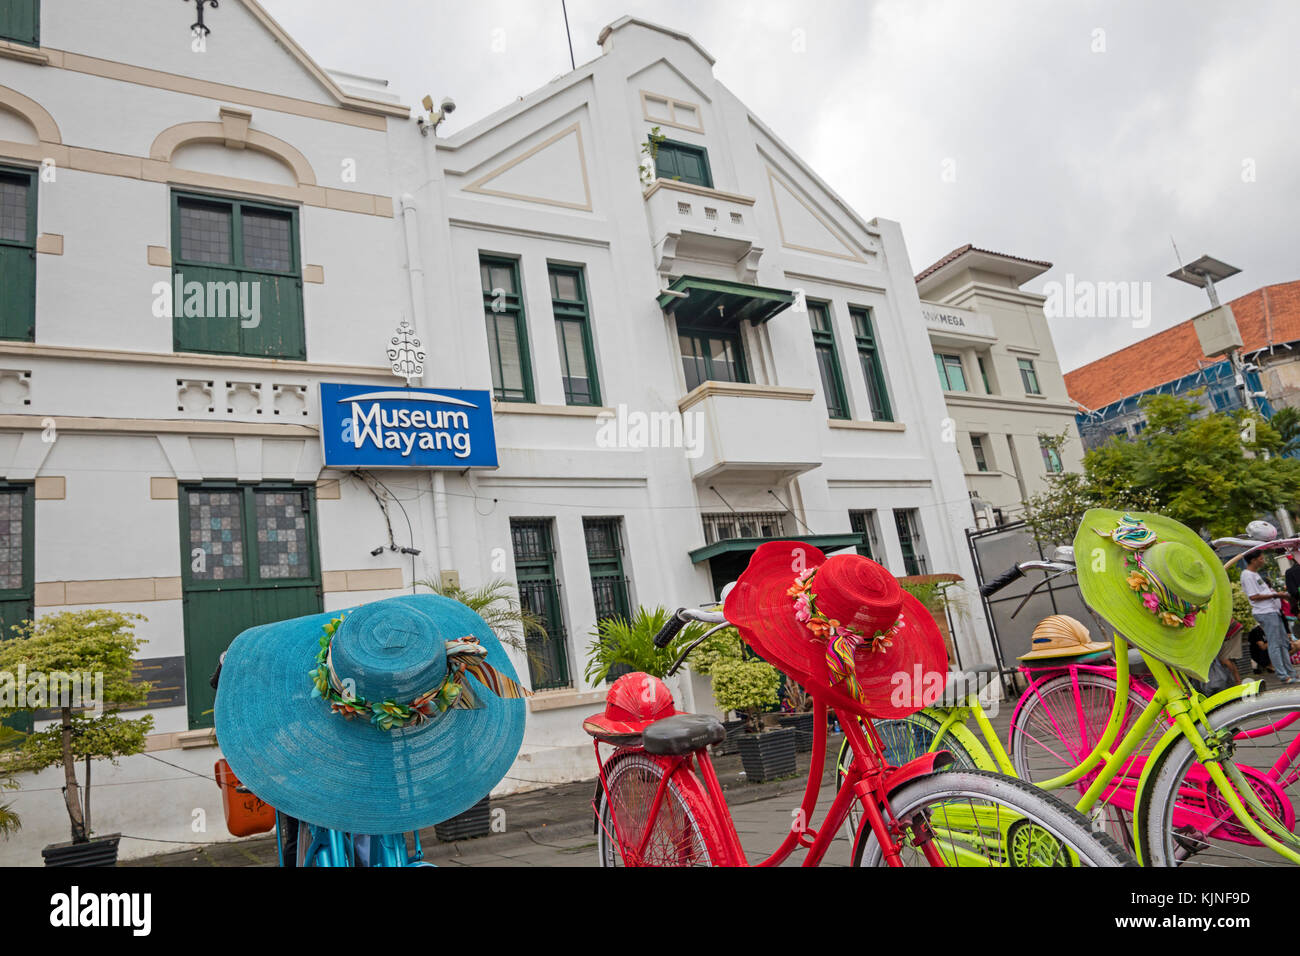 Colourful Dutch bicycles in front of the Wayang Museum dedicated to Javan wayang puppetry in Kota Tua, Jakarta, Indonesia Stock Photo